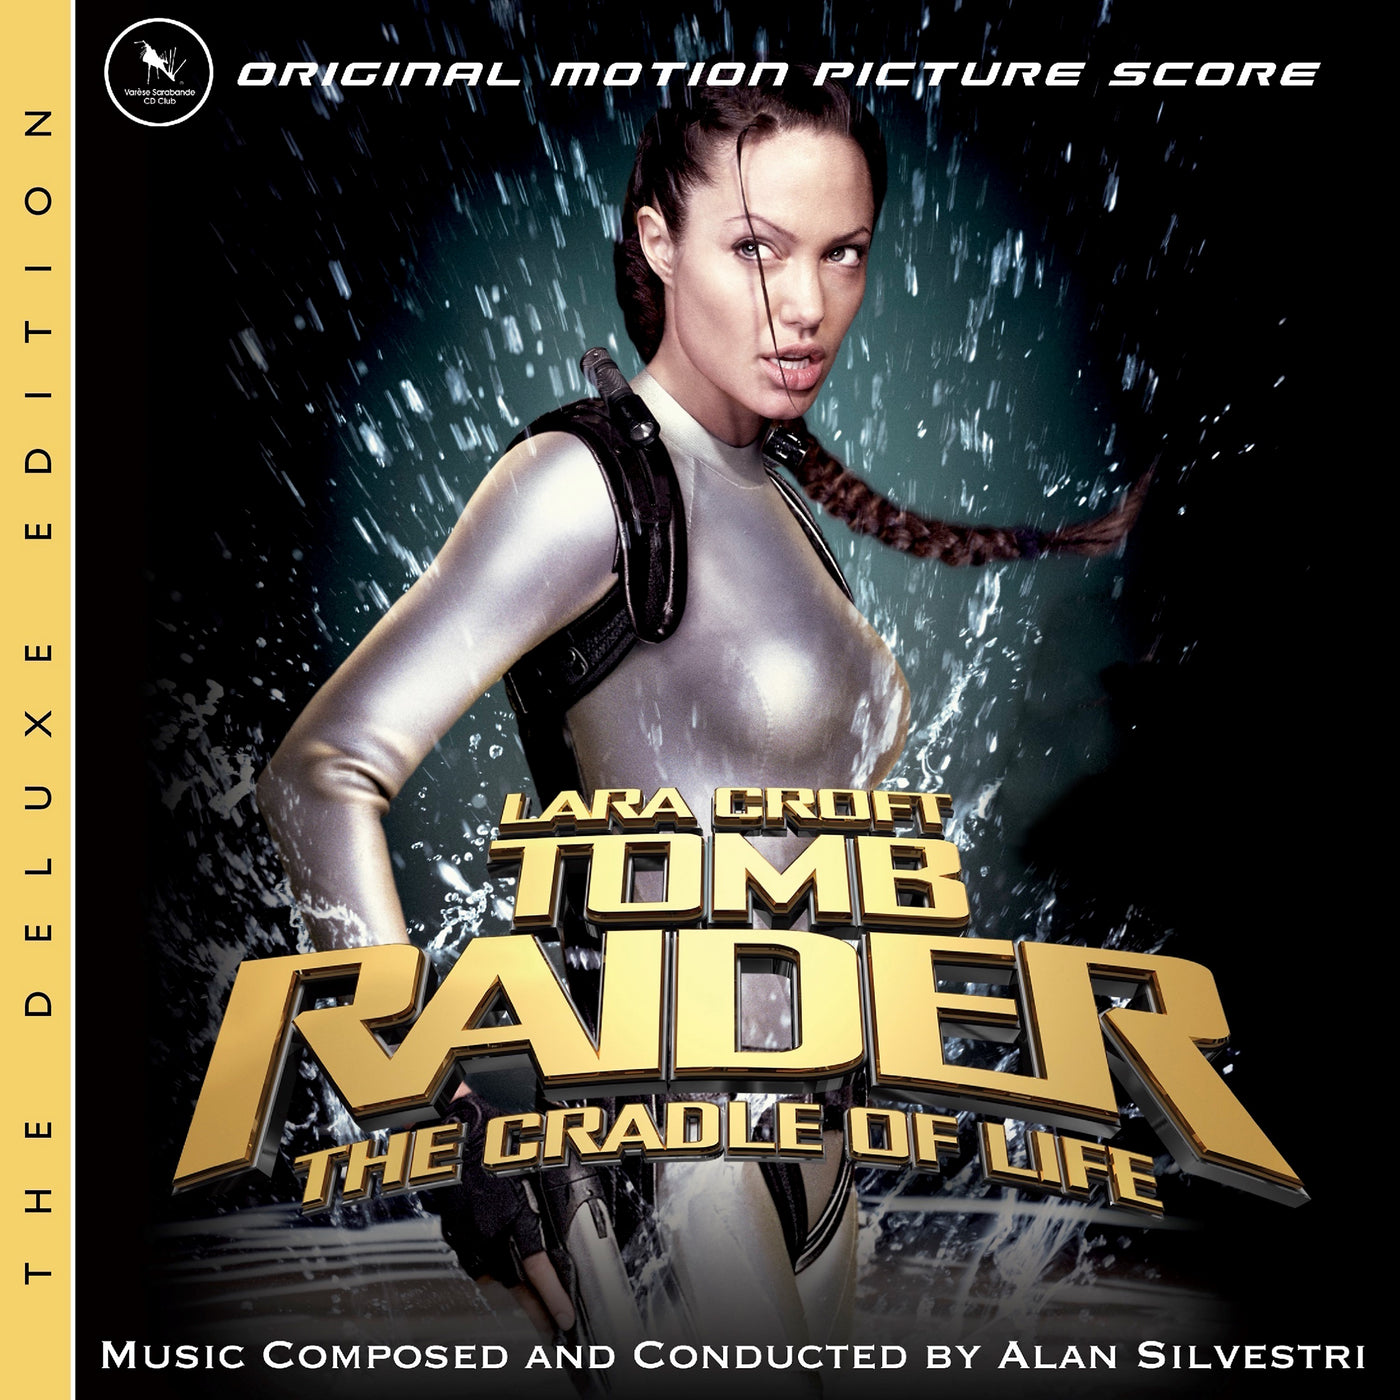 Lara Croft: Tomb Raider - The Cradle of Life (The Deluxe Edition) (2-CD)